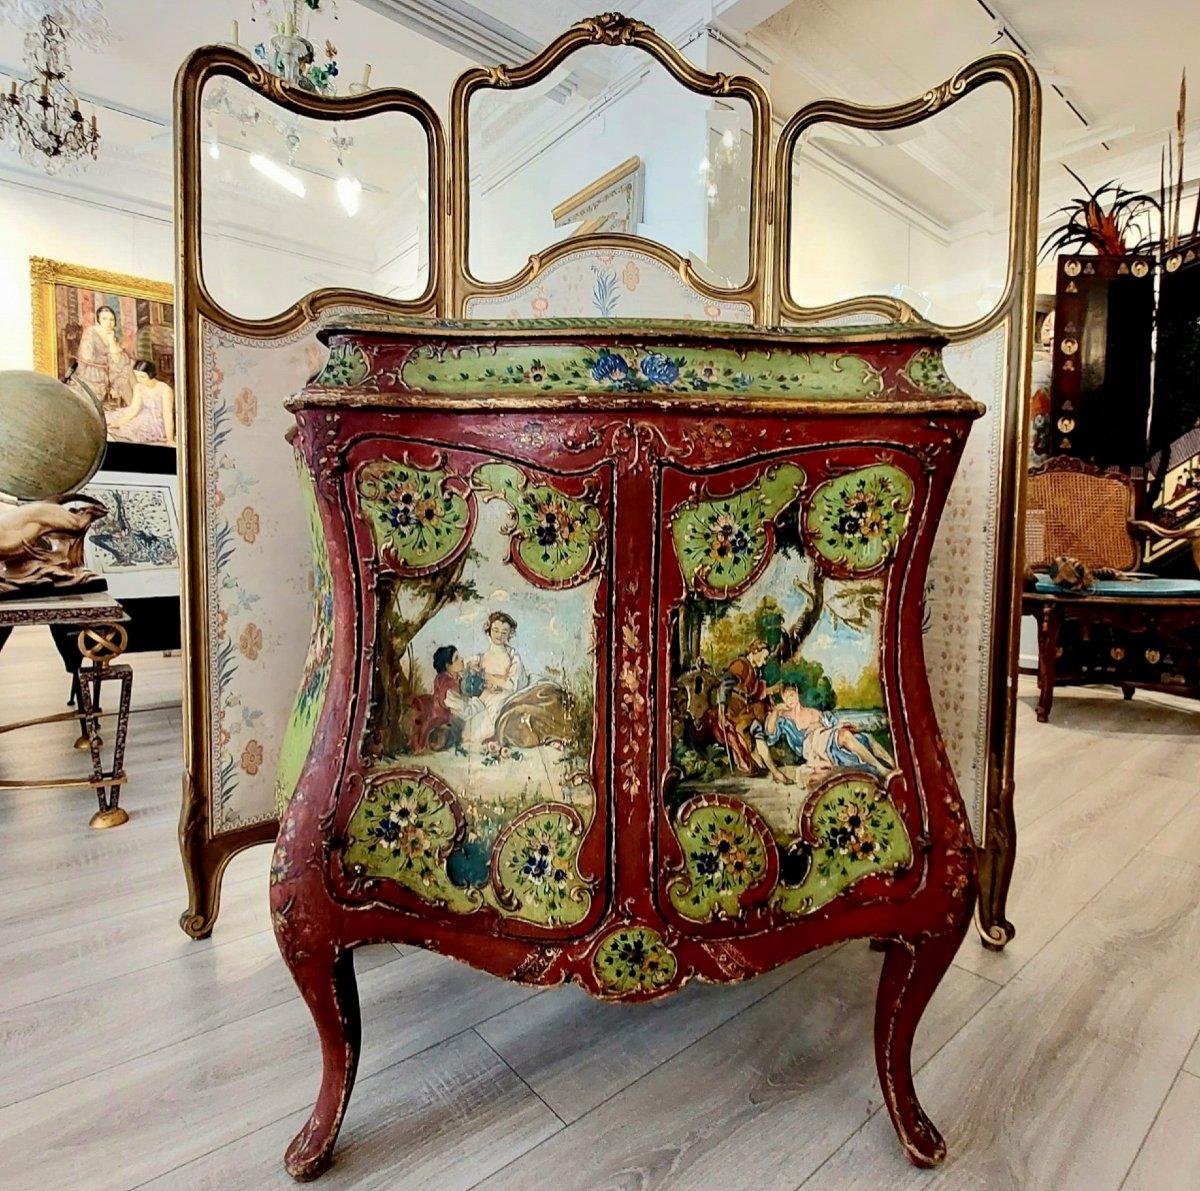 Crafted from lime green and red lacquered wood, this exquisite bombe-shaped bahut sideboard is meticulously hand-carved with amorous scenes and intricate floral patterns. Crowning the sideboard is a glass-topped display cabinet, designed to